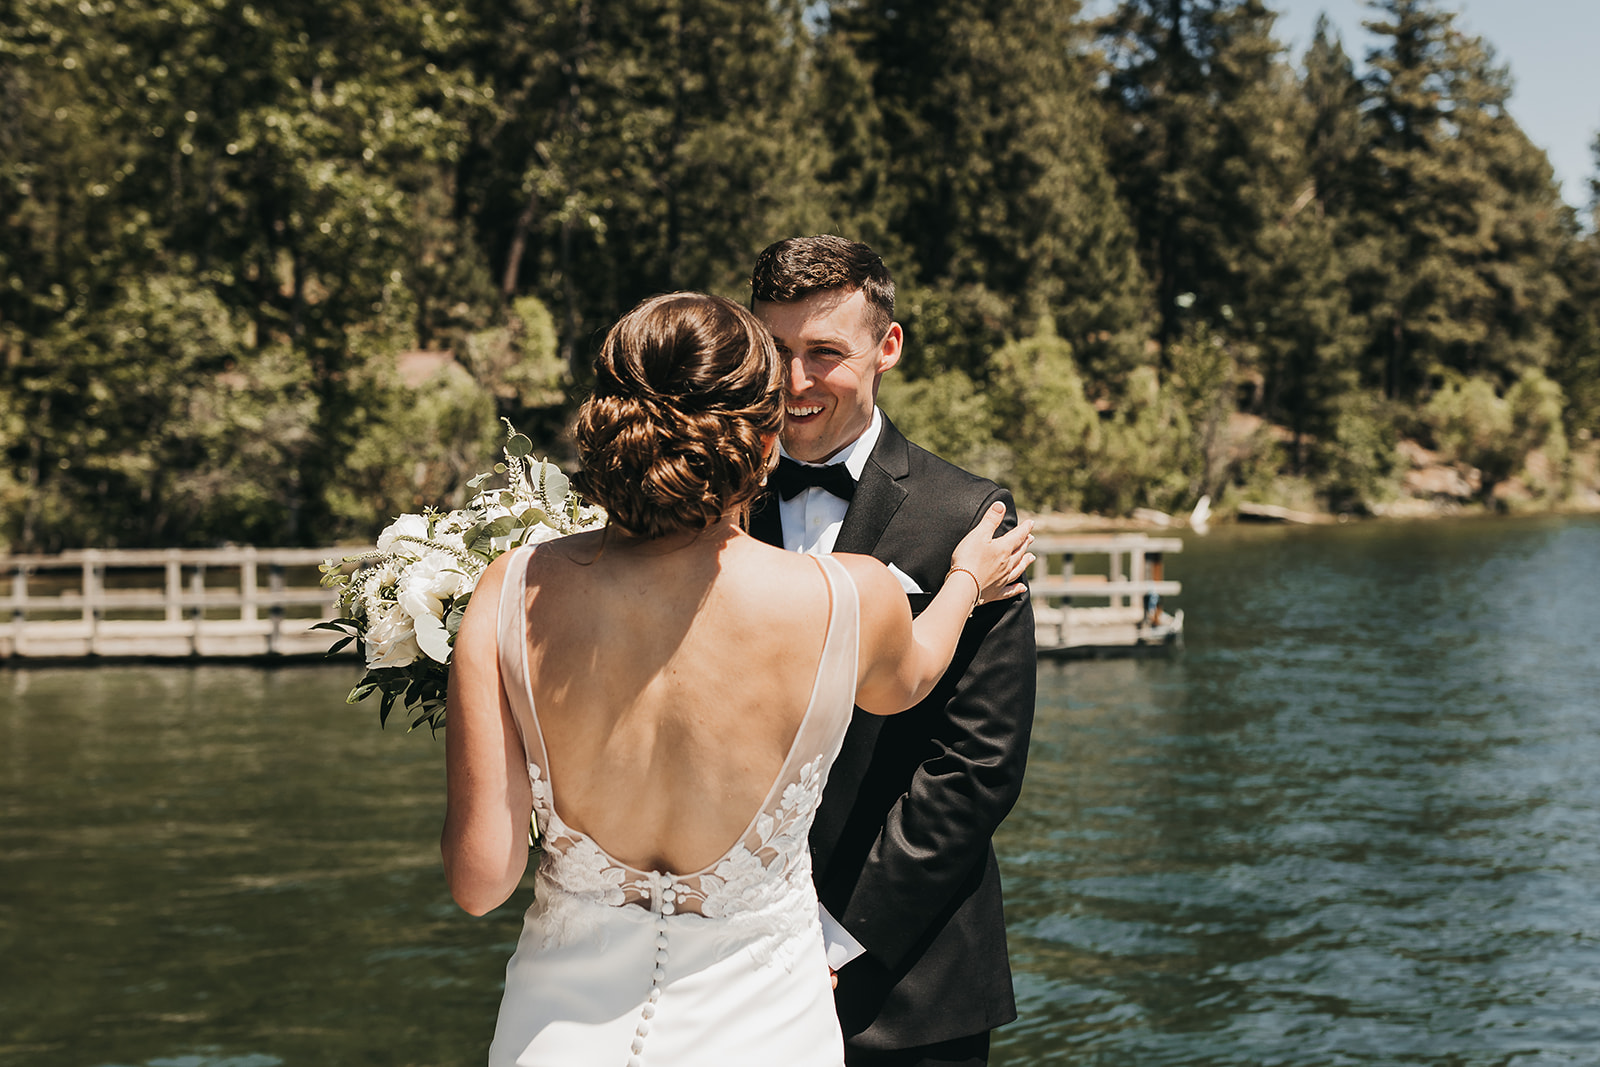 Bride and groom first look on private dock before the wedding ceremony on lake front property.